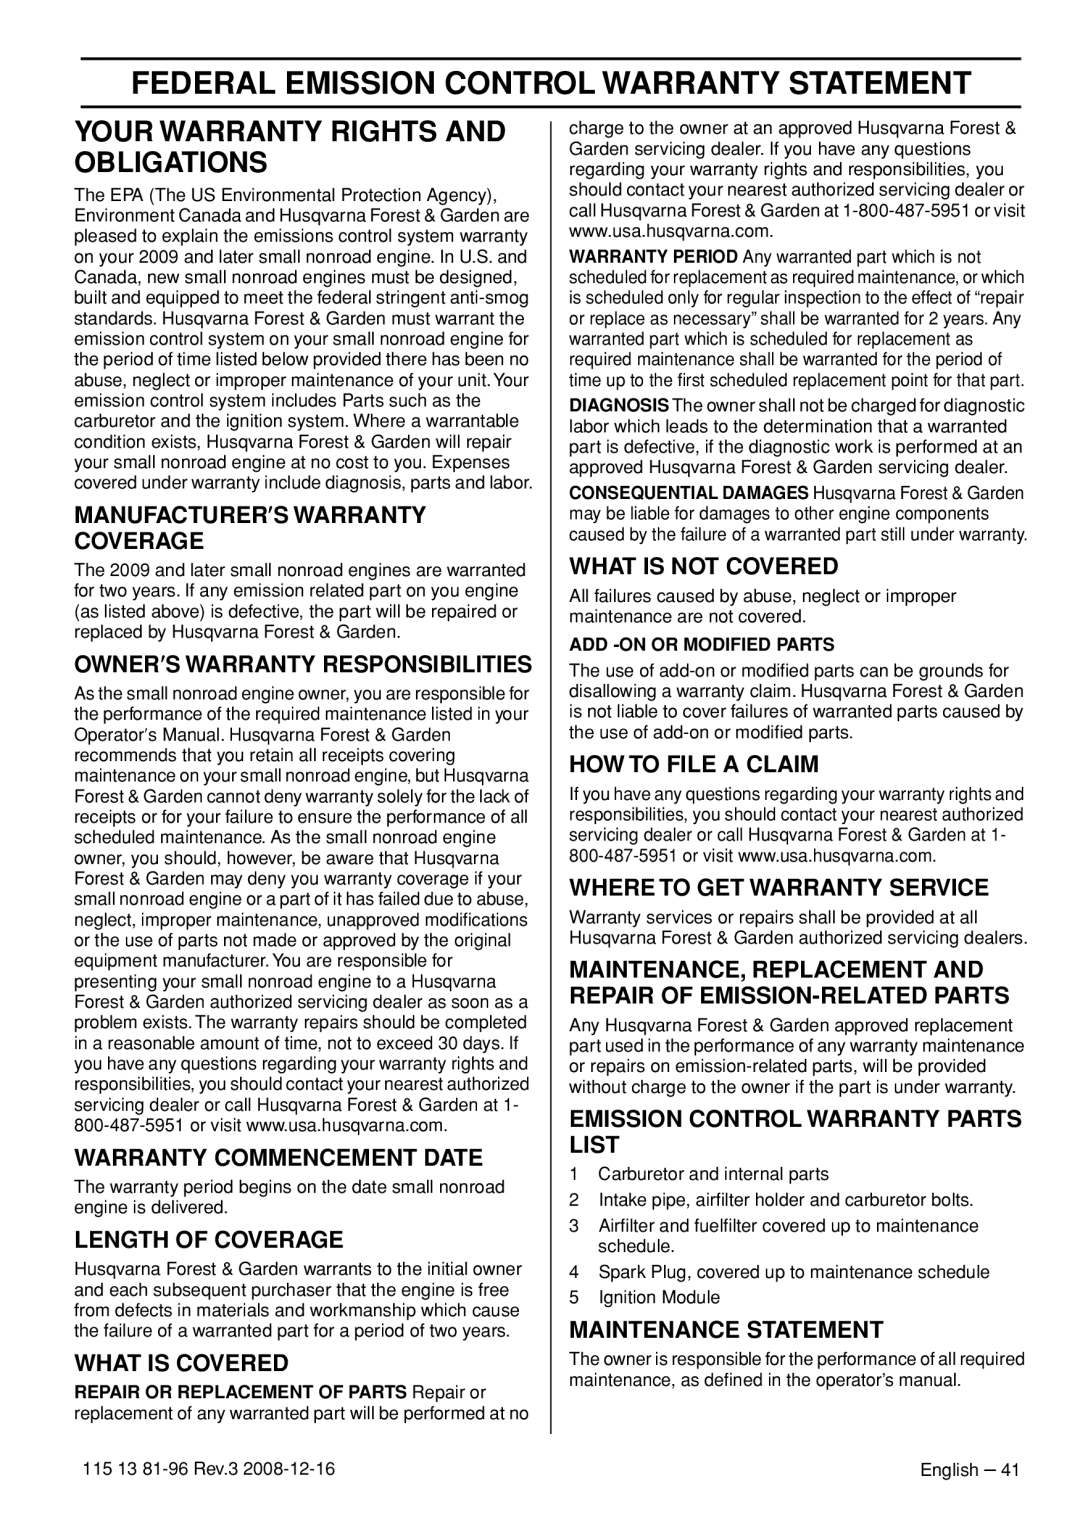 Husqvarna 445 EPA III Federal Emission Control Warranty Statement, Your Warranty Rights And Obligations, What Is Covered 